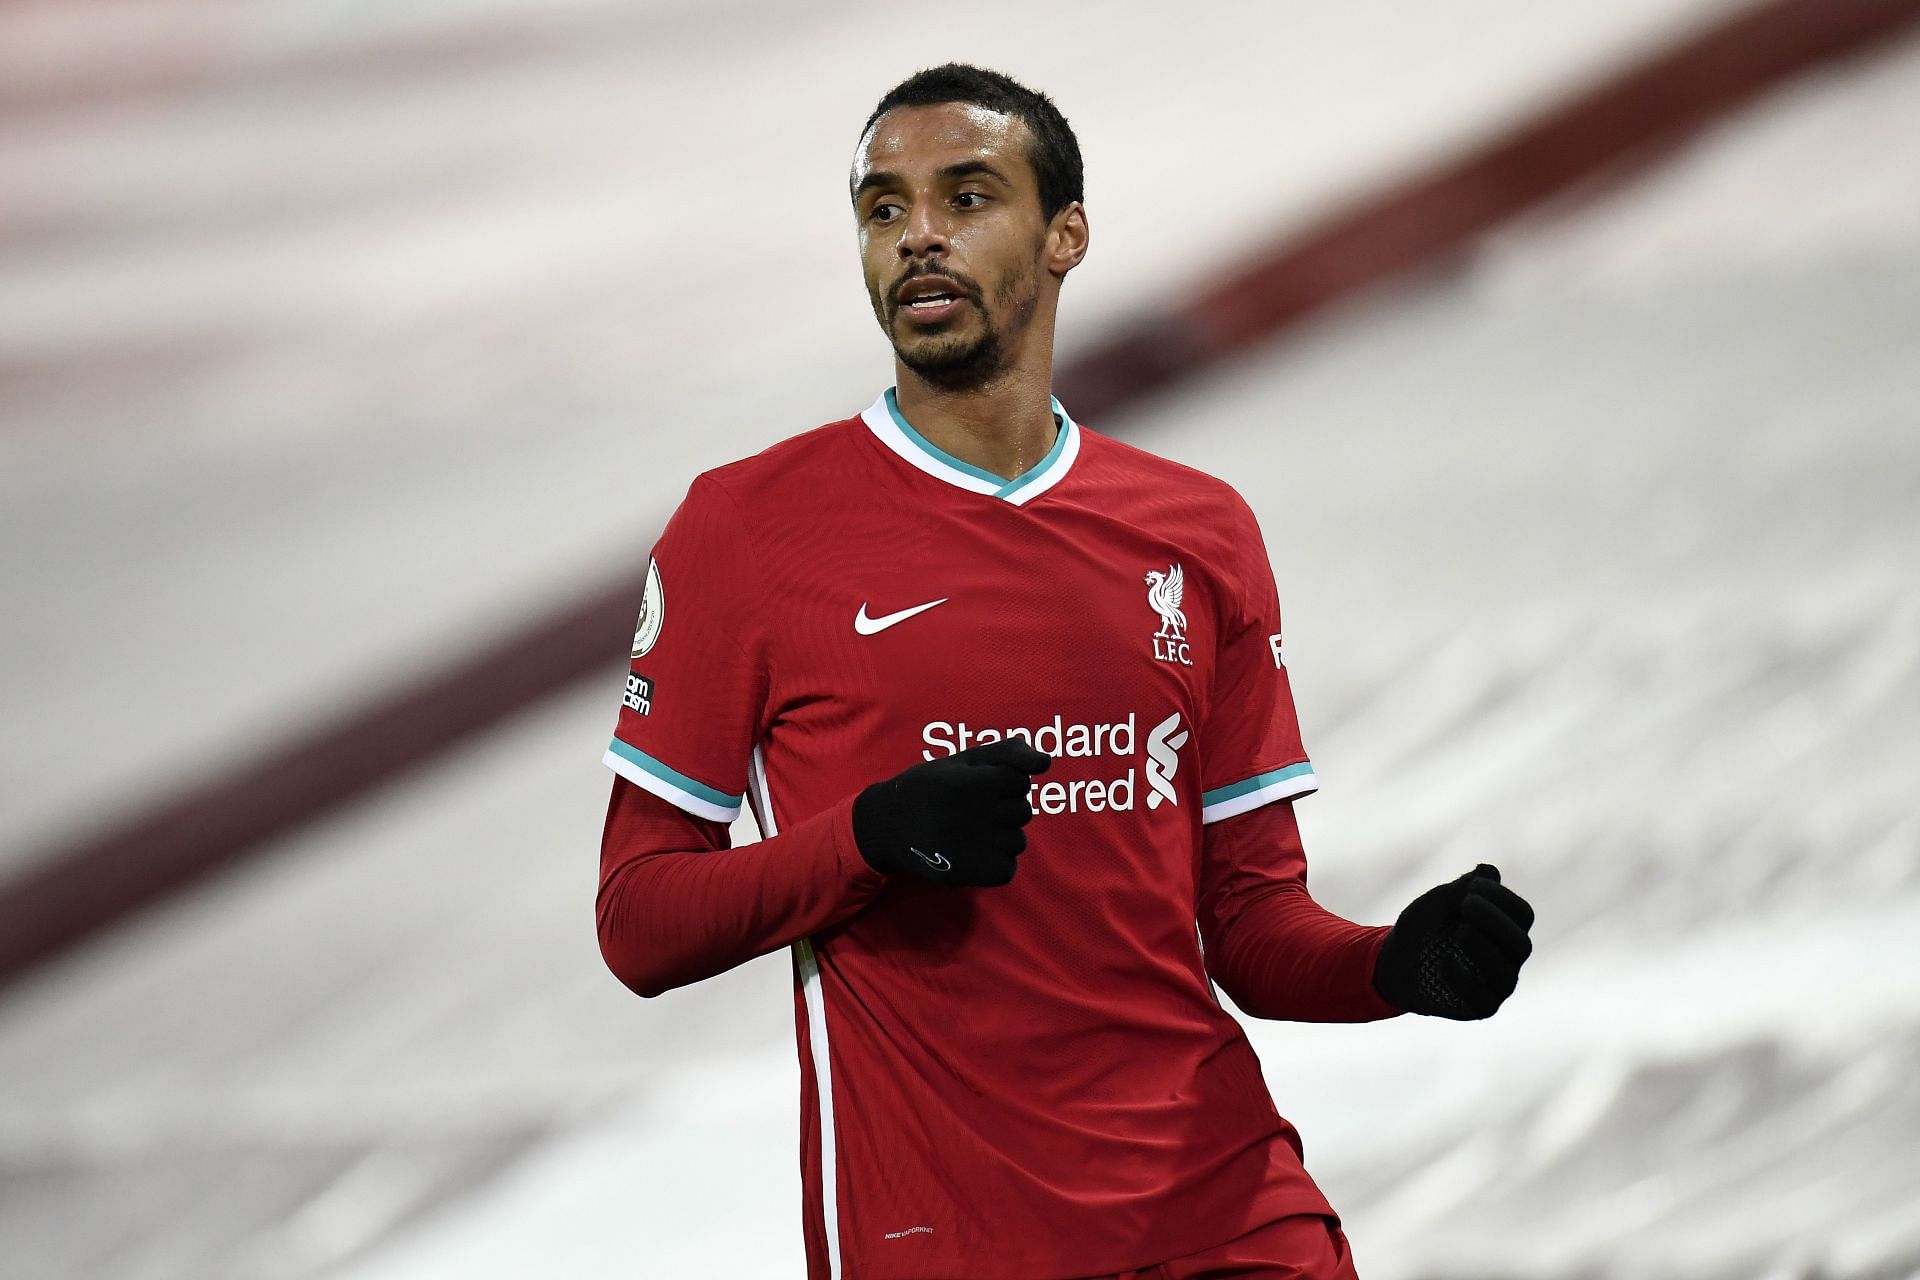 Joel Matip will come up against Vinicius Junior when Liverpool and Real Madrid clash today.